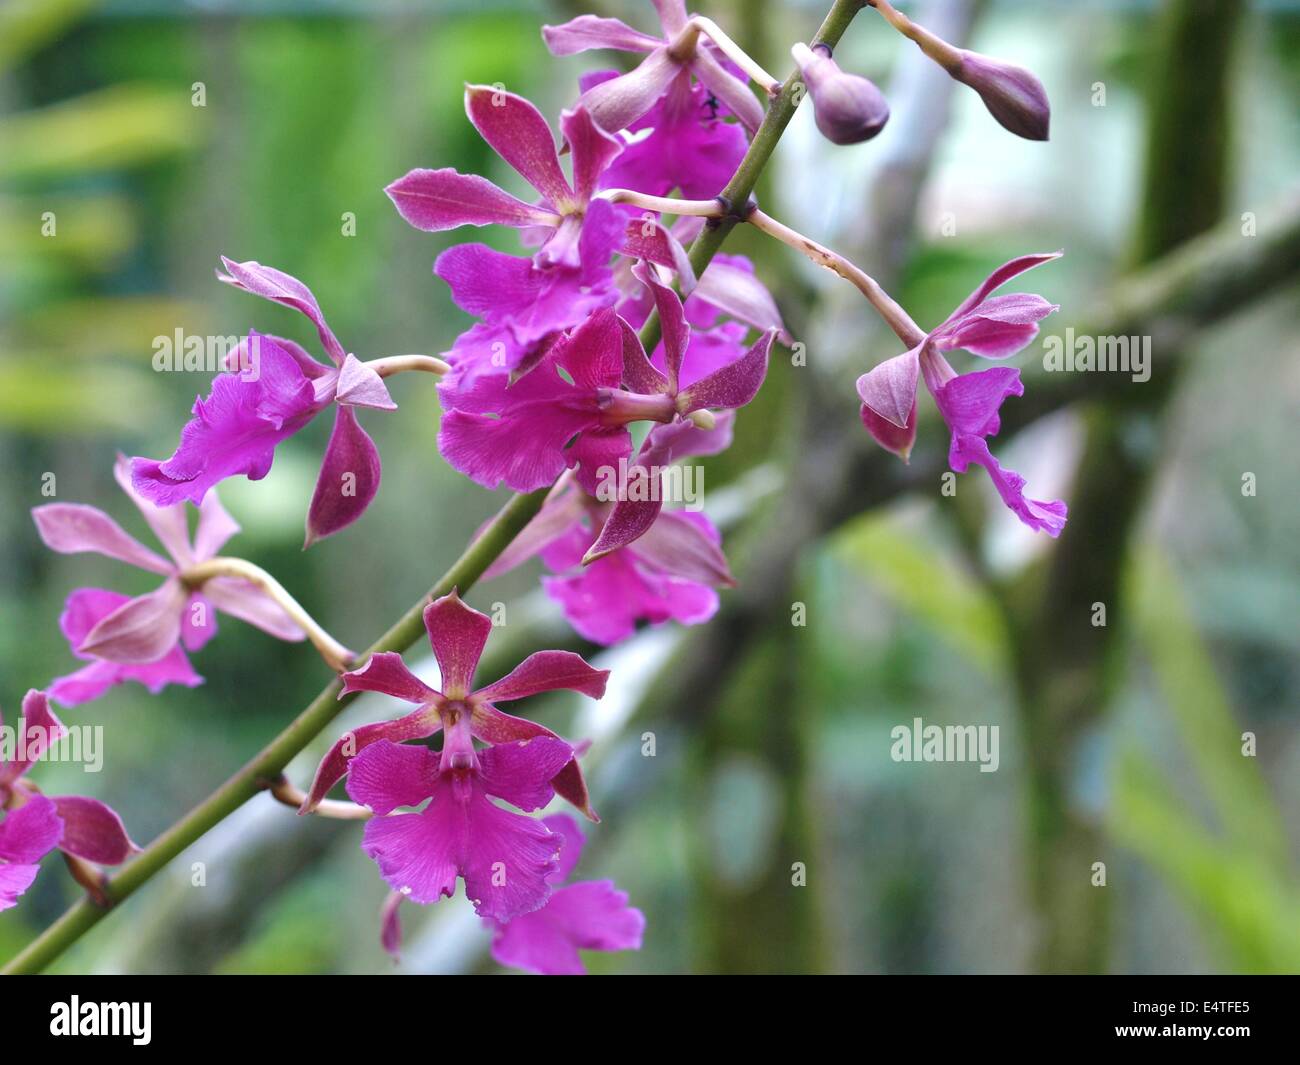 purple epidendrum orchid cluster 2 Stock Photo